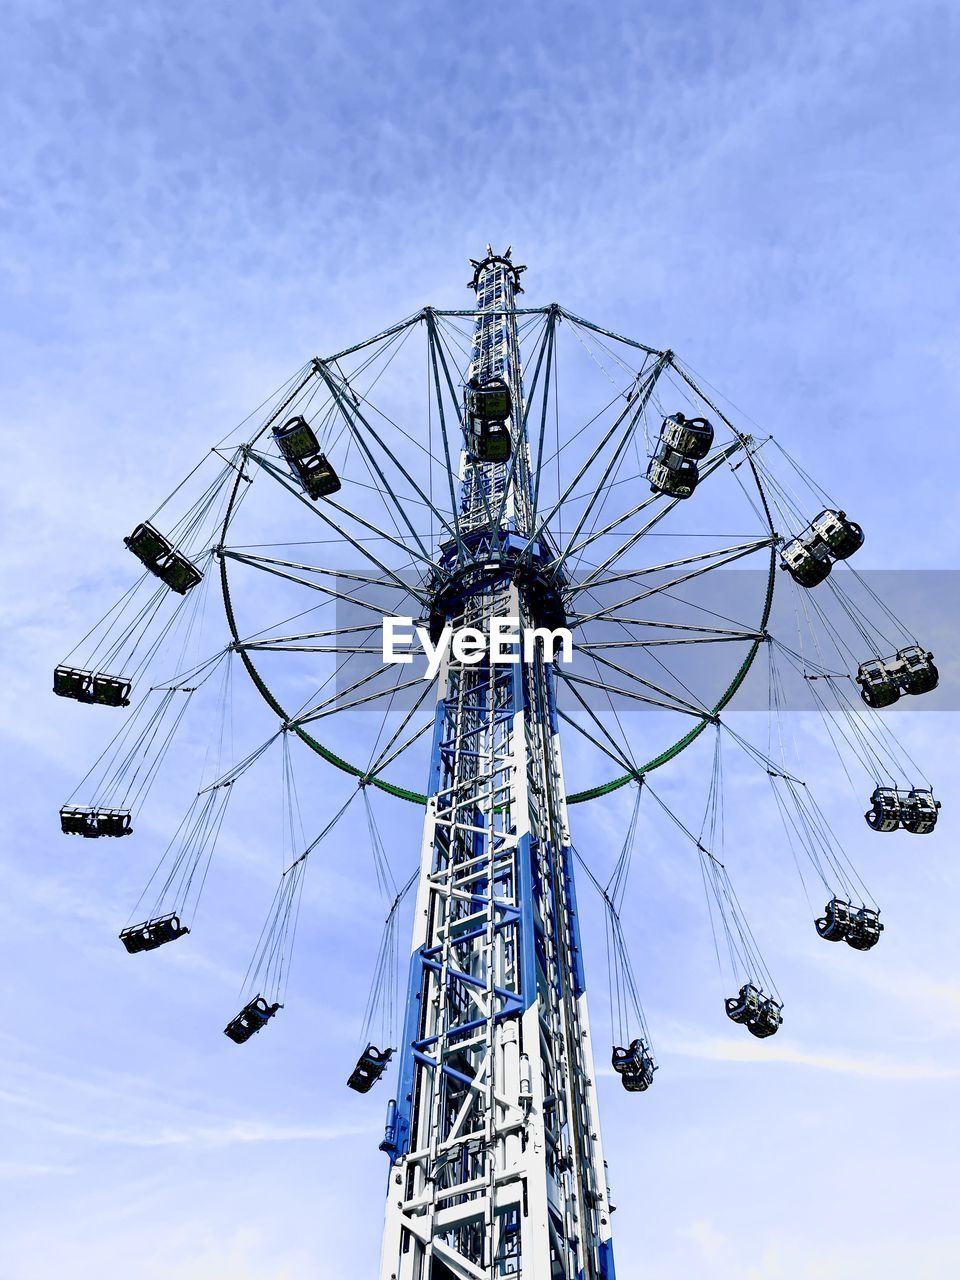 amusement park ride, amusement park, sky, ferris wheel, arts culture and entertainment, low angle view, nature, cloud, architecture, outdoors, spinning, carnival, fun, no people, built structure, day, traveling carnival, enjoyment, blue, chain swing ride, technology, geometric shape